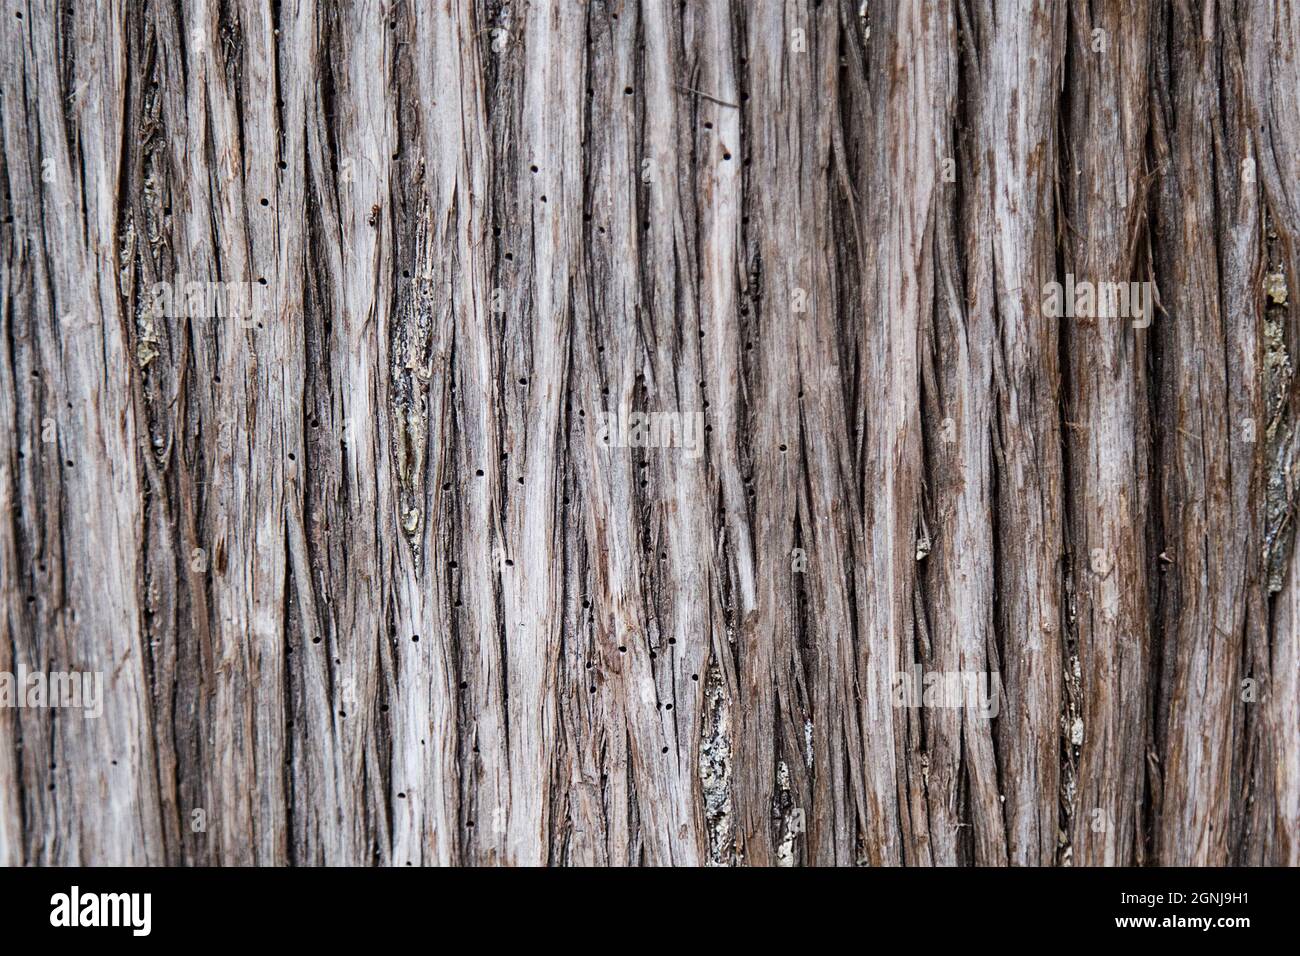 Bark of tree close up with dots made by insects. Tree damaged by bark beetle. Background and wallpaper picture with vertical lines. Wooden natural Stock Photo